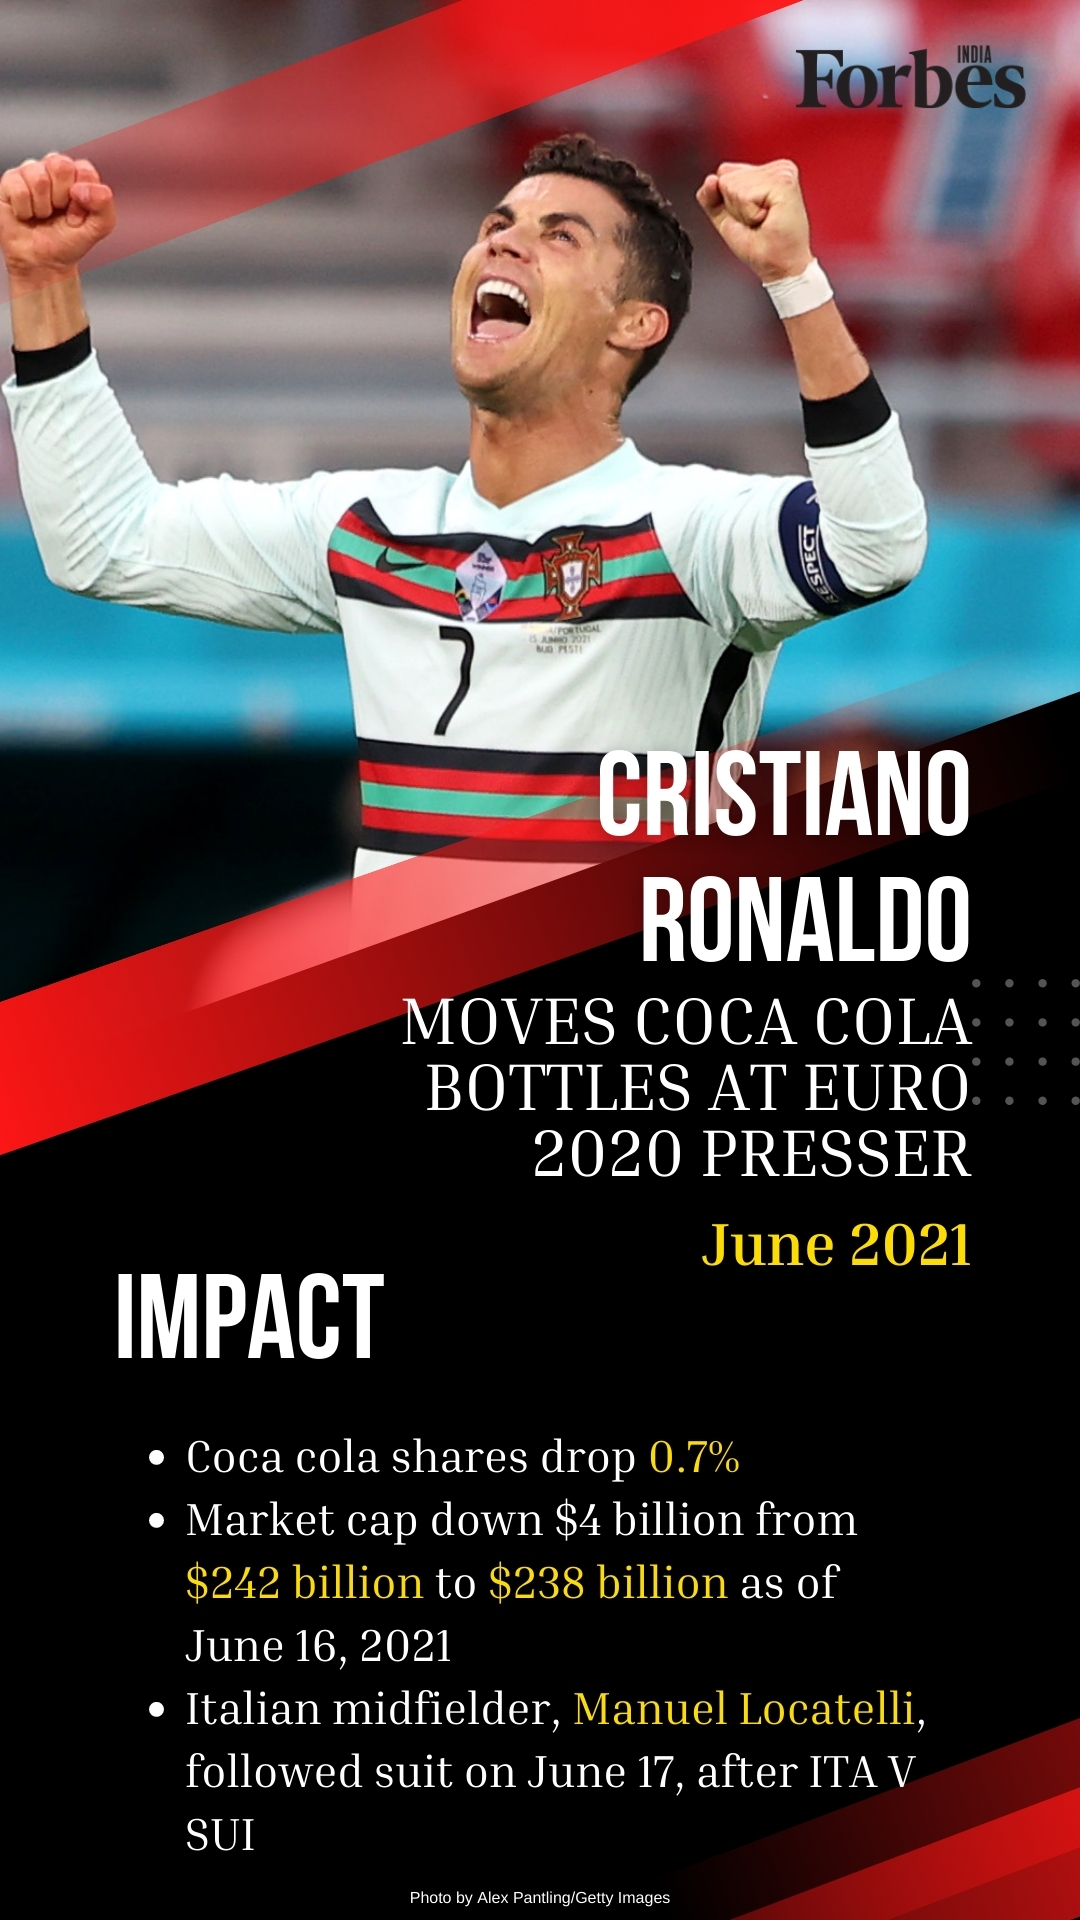 Cristiano Ronaldo and 10 other market-moving celebrity moments